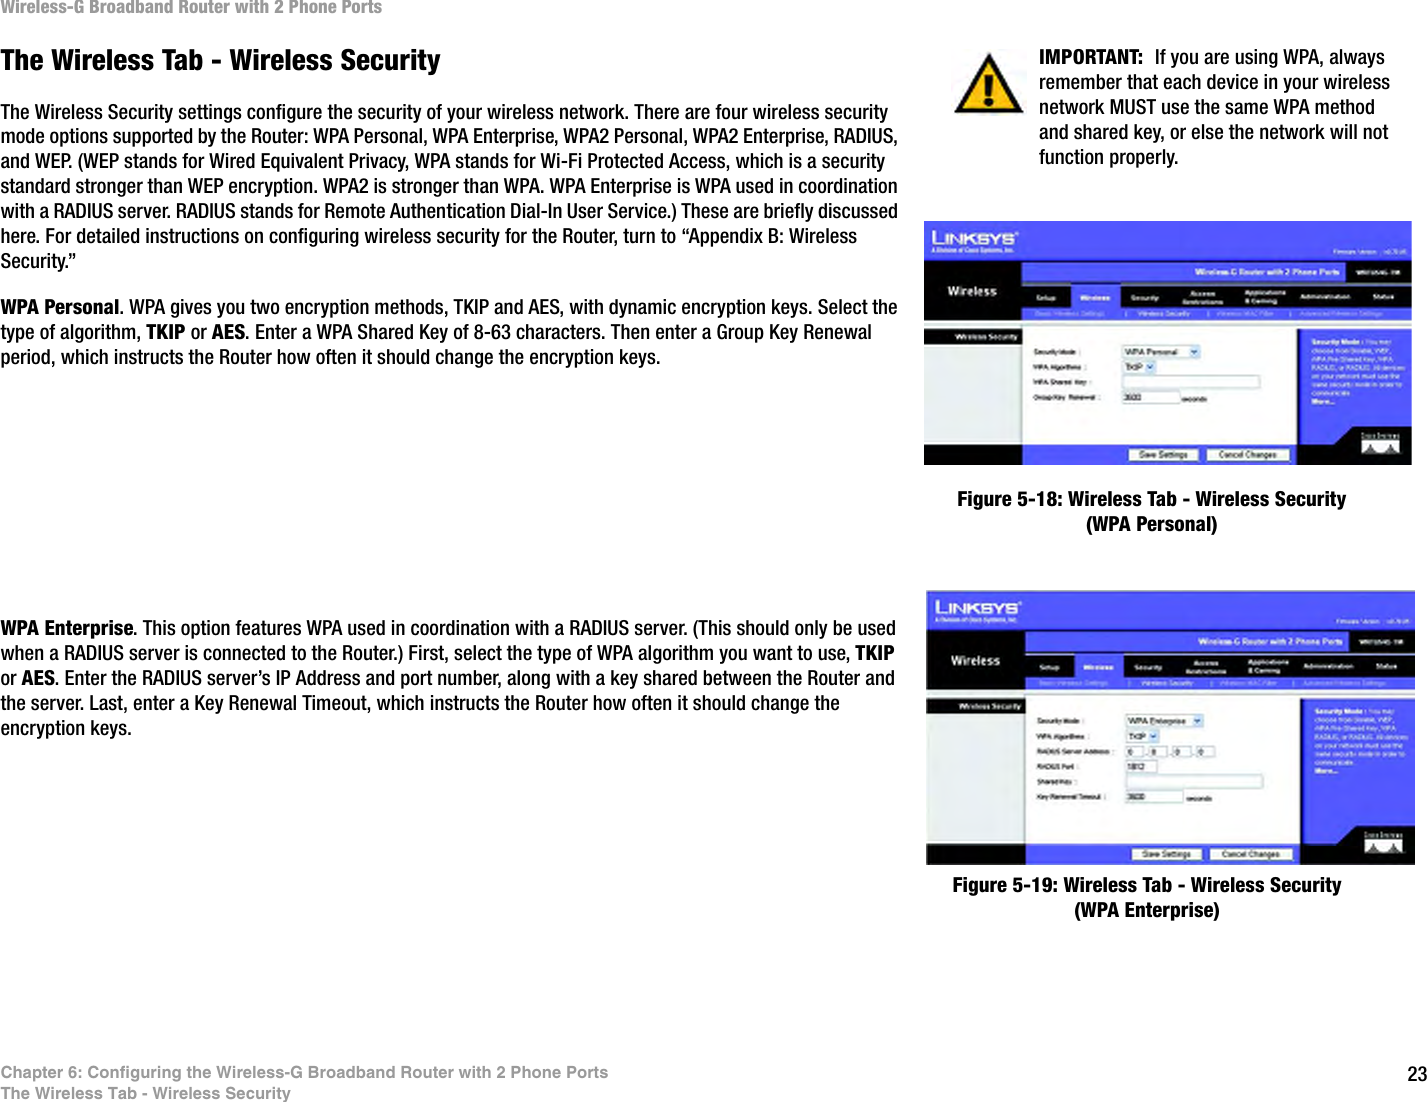 23Chapter 6: Configuring the Wireless-G Broadband Router with 2 Phone PortsThe Wireless Tab - Wireless SecurityWireless-G Broadband Router with 2 Phone PortsThe Wireless Tab - Wireless SecurityThe Wireless Security settings configure the security of your wireless network. There are four wireless security mode options supported by the Router: WPA Personal, WPA Enterprise, WPA2 Personal, WPA2 Enterprise, RADIUS, and WEP. (WEP stands for Wired Equivalent Privacy, WPA stands for Wi-Fi Protected Access, which is a security standard stronger than WEP encryption. WPA2 is stronger than WPA. WPA Enterprise is WPA used in coordination with a RADIUS server. RADIUS stands for Remote Authentication Dial-In User Service.) These are briefly discussed here. For detailed instructions on configuring wireless security for the Router, turn to “Appendix B: Wireless Security.”WPA Personal. WPA gives you two encryption methods, TKIP and AES, with dynamic encryption keys. Select the type of algorithm, TKIP or AES. Enter a WPA Shared Key of 8-63 characters. Then enter a Group Key Renewal period, which instructs the Router how often it should change the encryption keys.WPA Enterprise. This option features WPA used in coordination with a RADIUS server. (This should only be used when a RADIUS server is connected to the Router.) First, select the type of WPA algorithm you want to use, TKIP or AES. Enter the RADIUS server’s IP Address and port number, along with a key shared between the Router and the server. Last, enter a Key Renewal Timeout, which instructs the Router how often it should change the encryption keys.Figure 5-18: Wireless Tab - Wireless Security (WPA Personal)Figure 5-19: Wireless Tab - Wireless Security (WPA Enterprise)IMPORTANT:  If you are using WPA, always remember that each device in your wireless network MUST use the same WPA method and shared key, or else the network will not function properly.